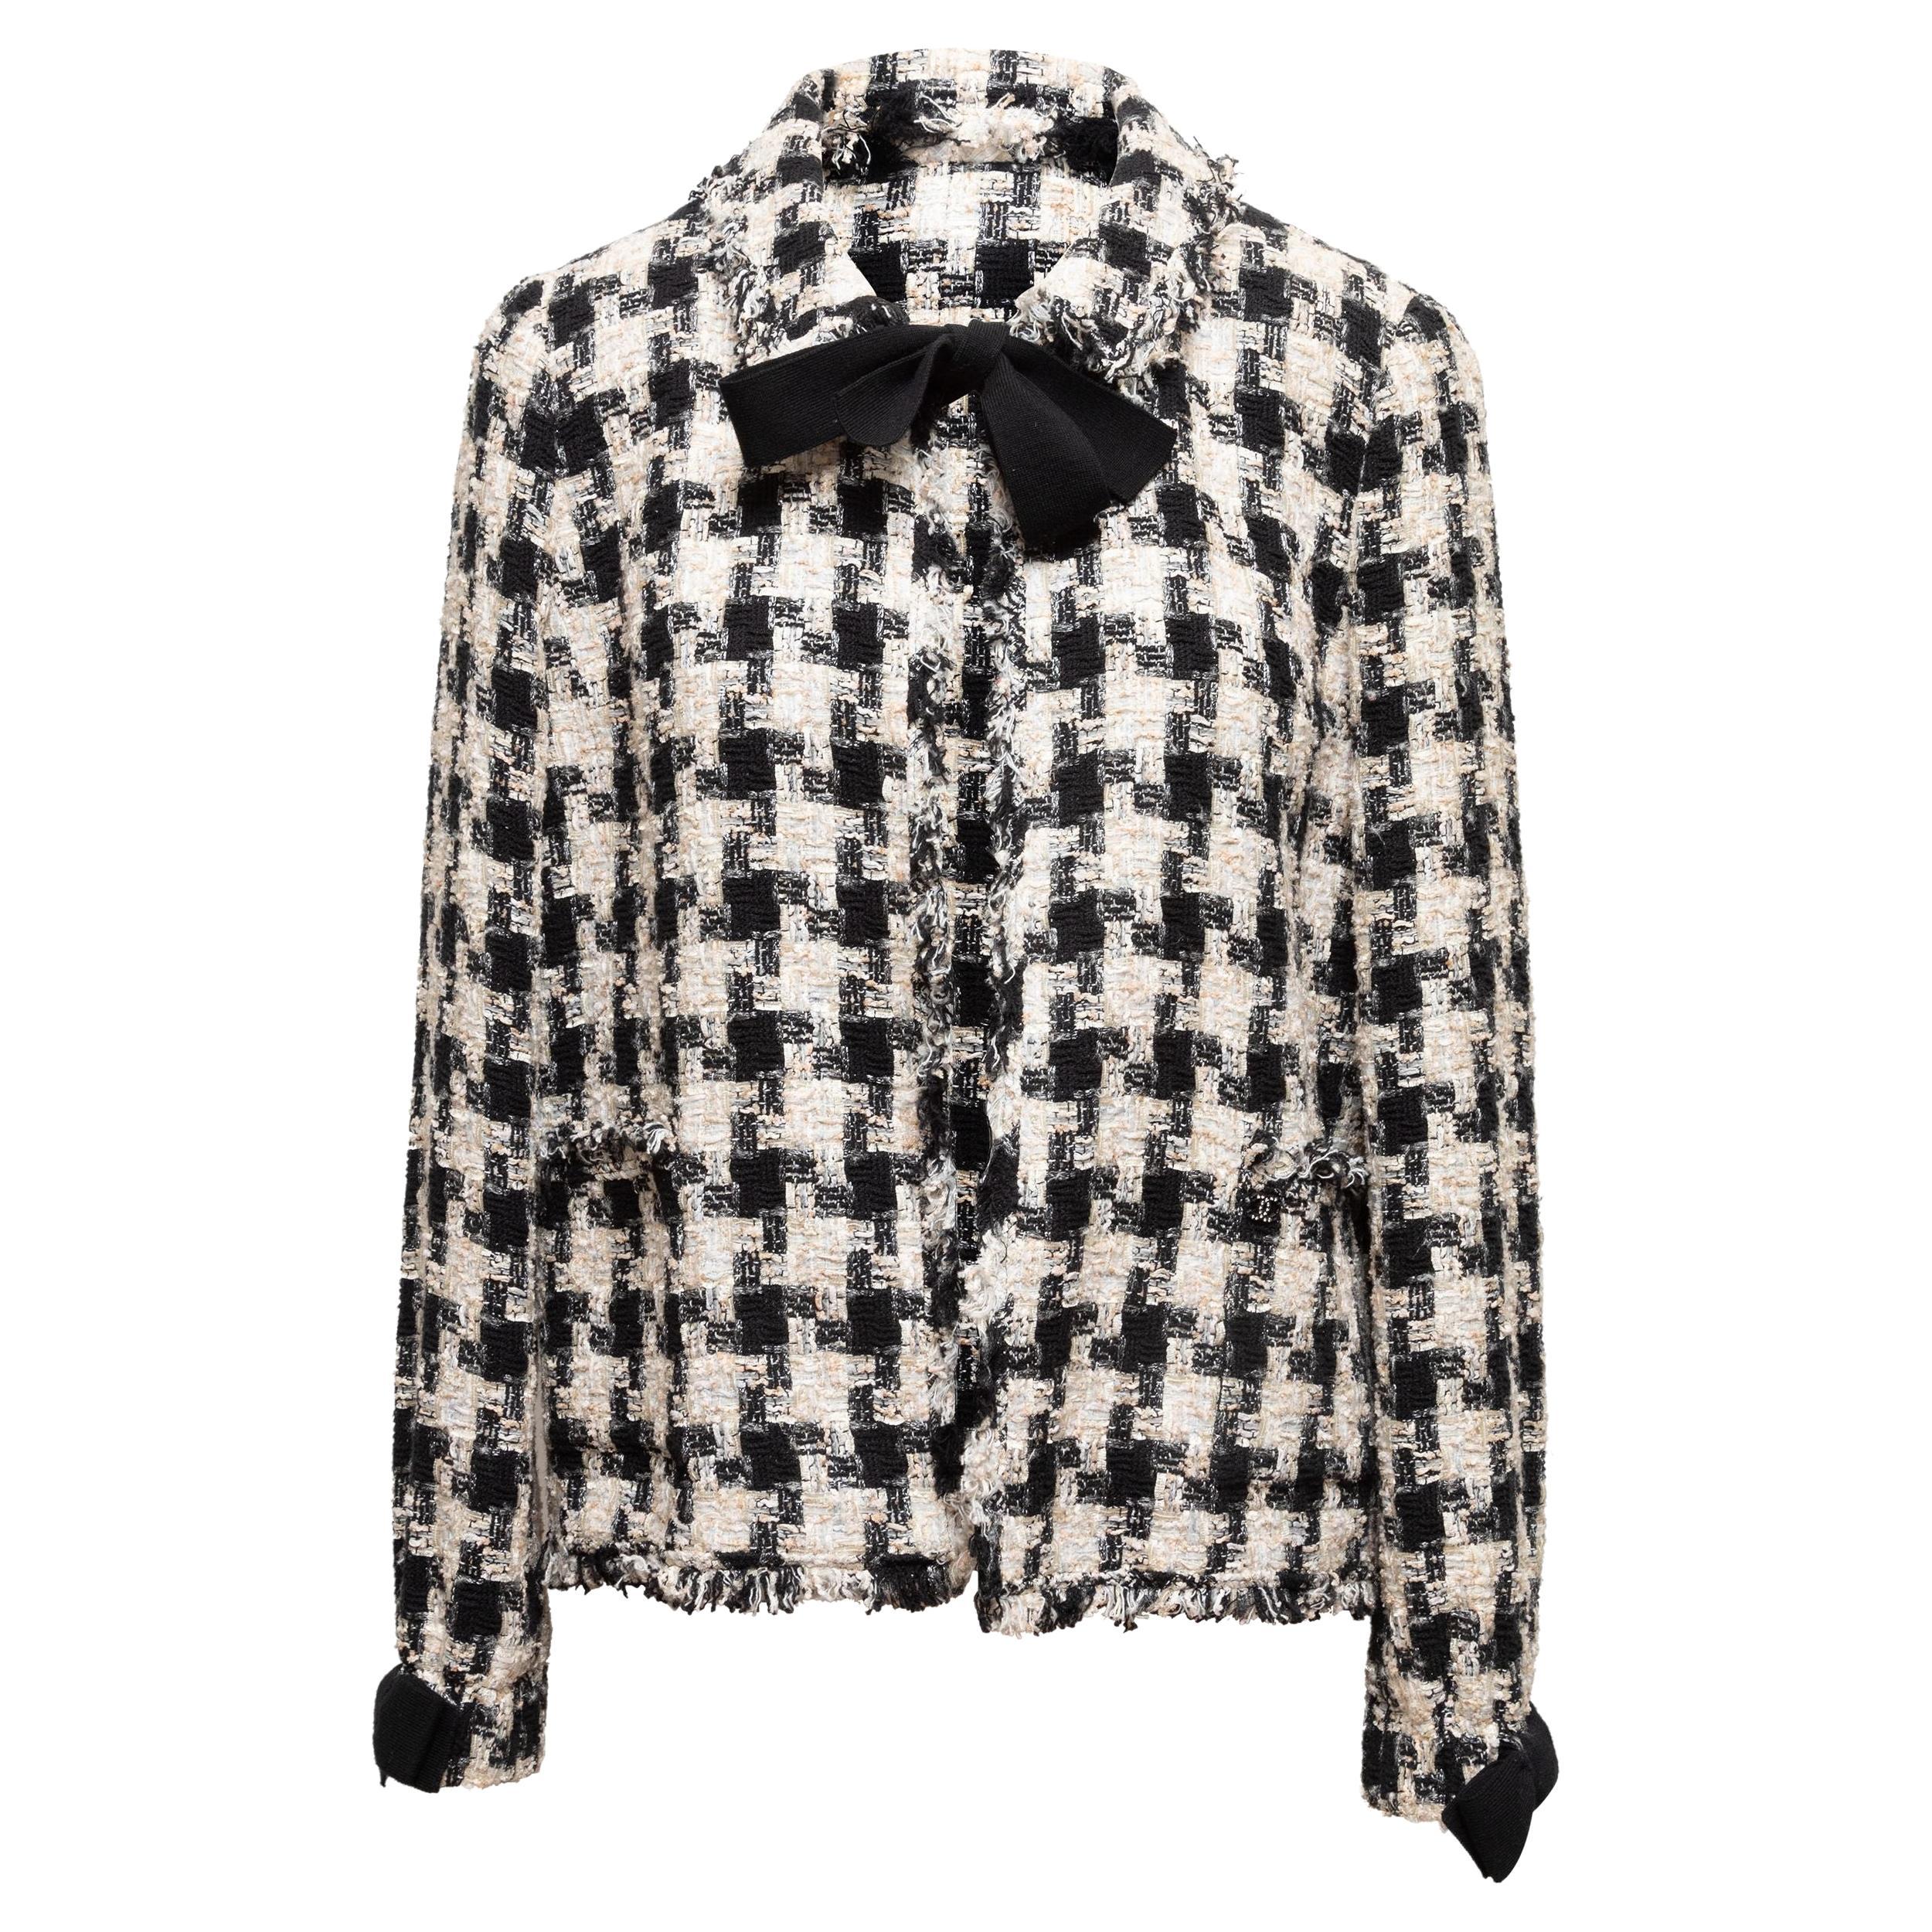 Chanel Fall 2004 Black & White Houndstooth Tweed Jacket